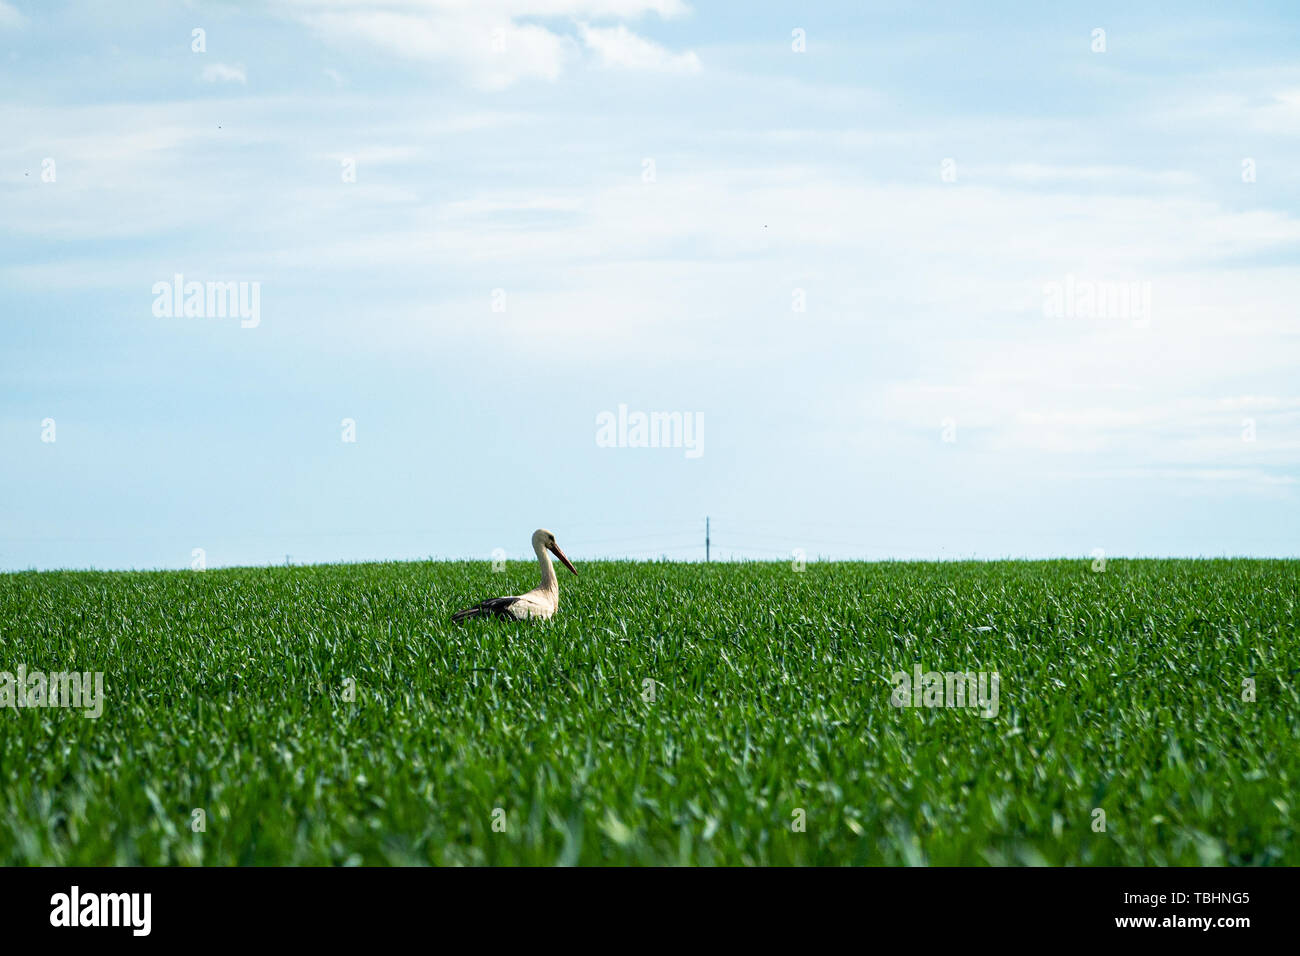 Stork bird hunting in agricultural crop field Stock Photo